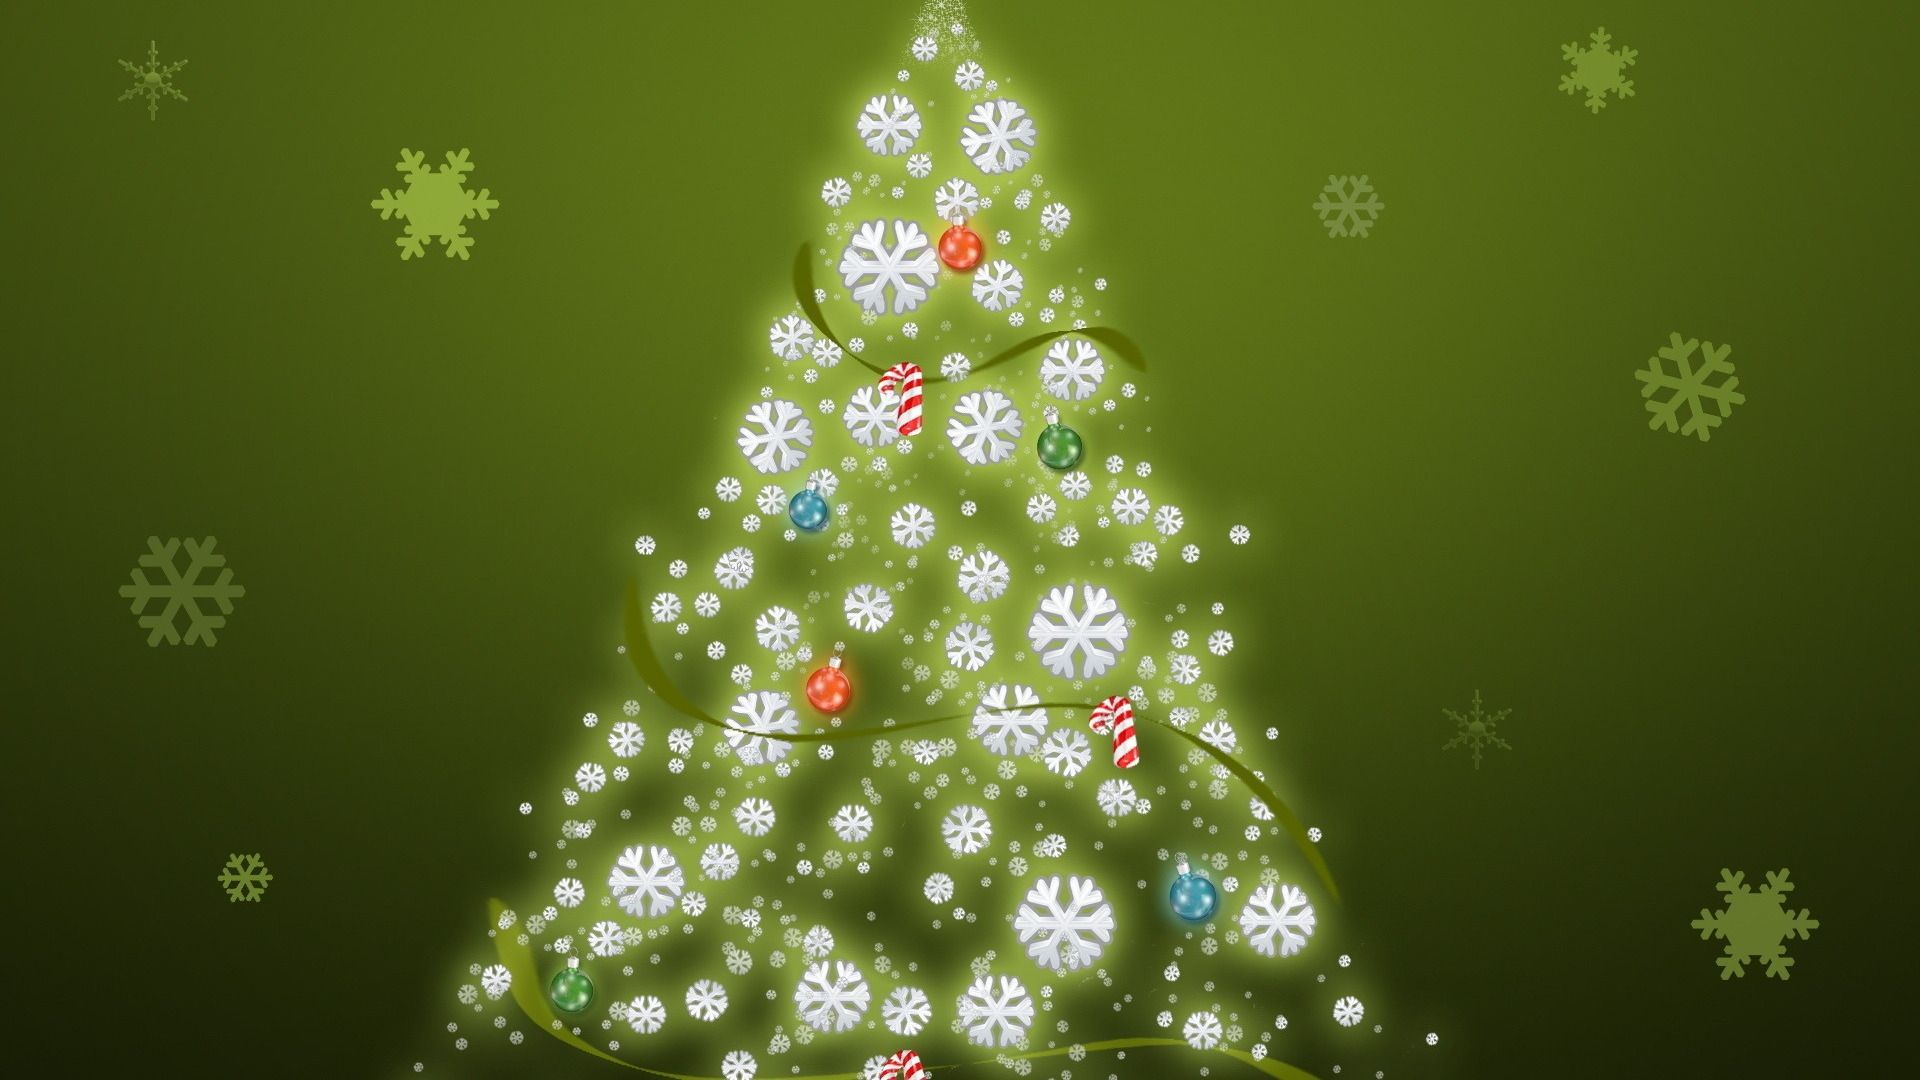 Merry Christmas Green Abstract Desktop Background Photo